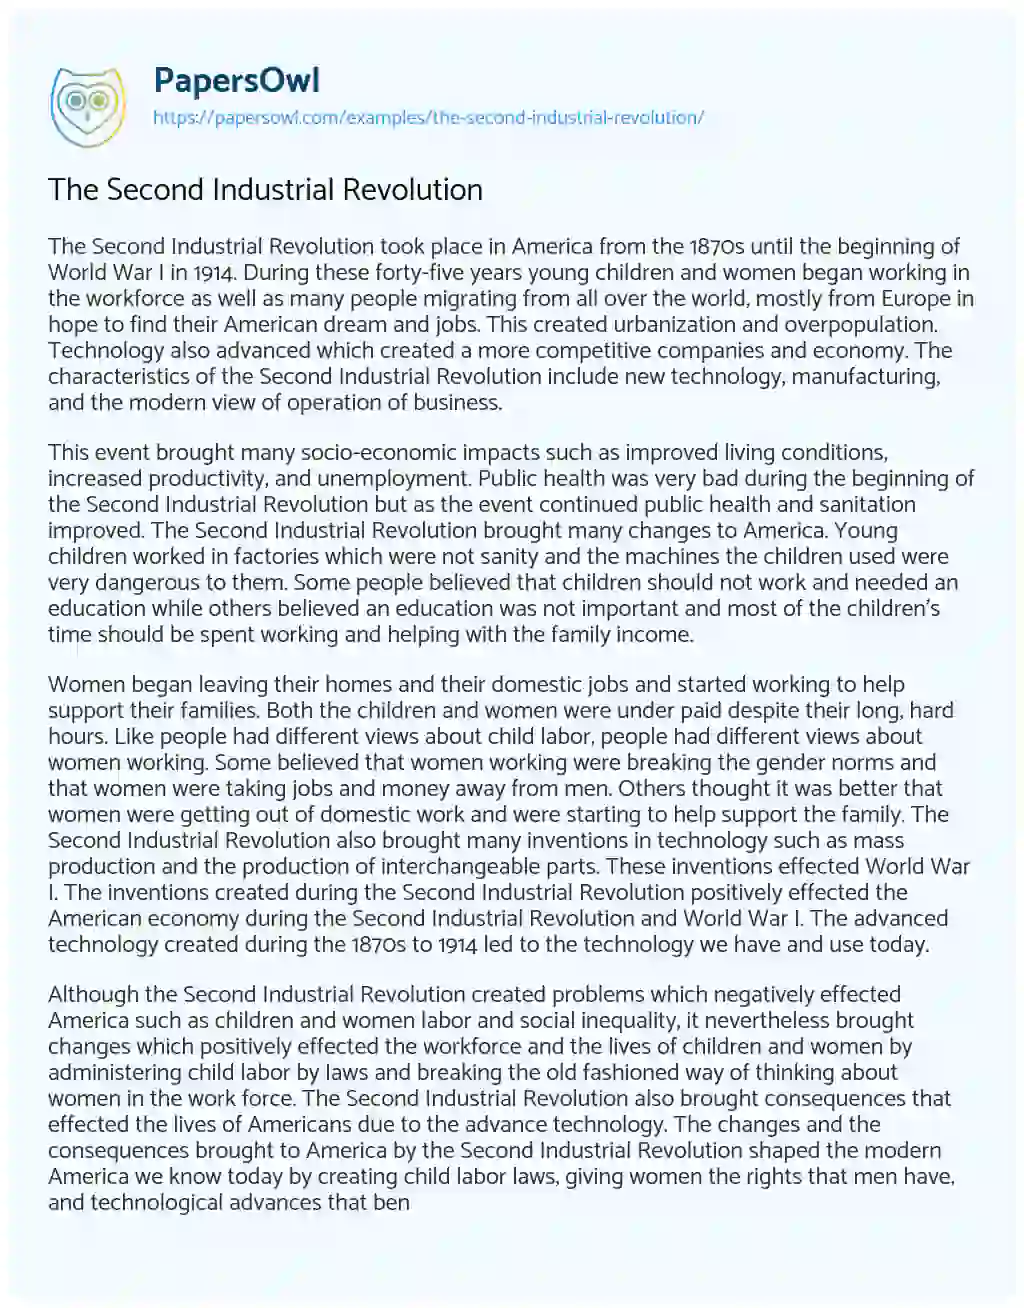 Essay on The Second Industrial Revolution